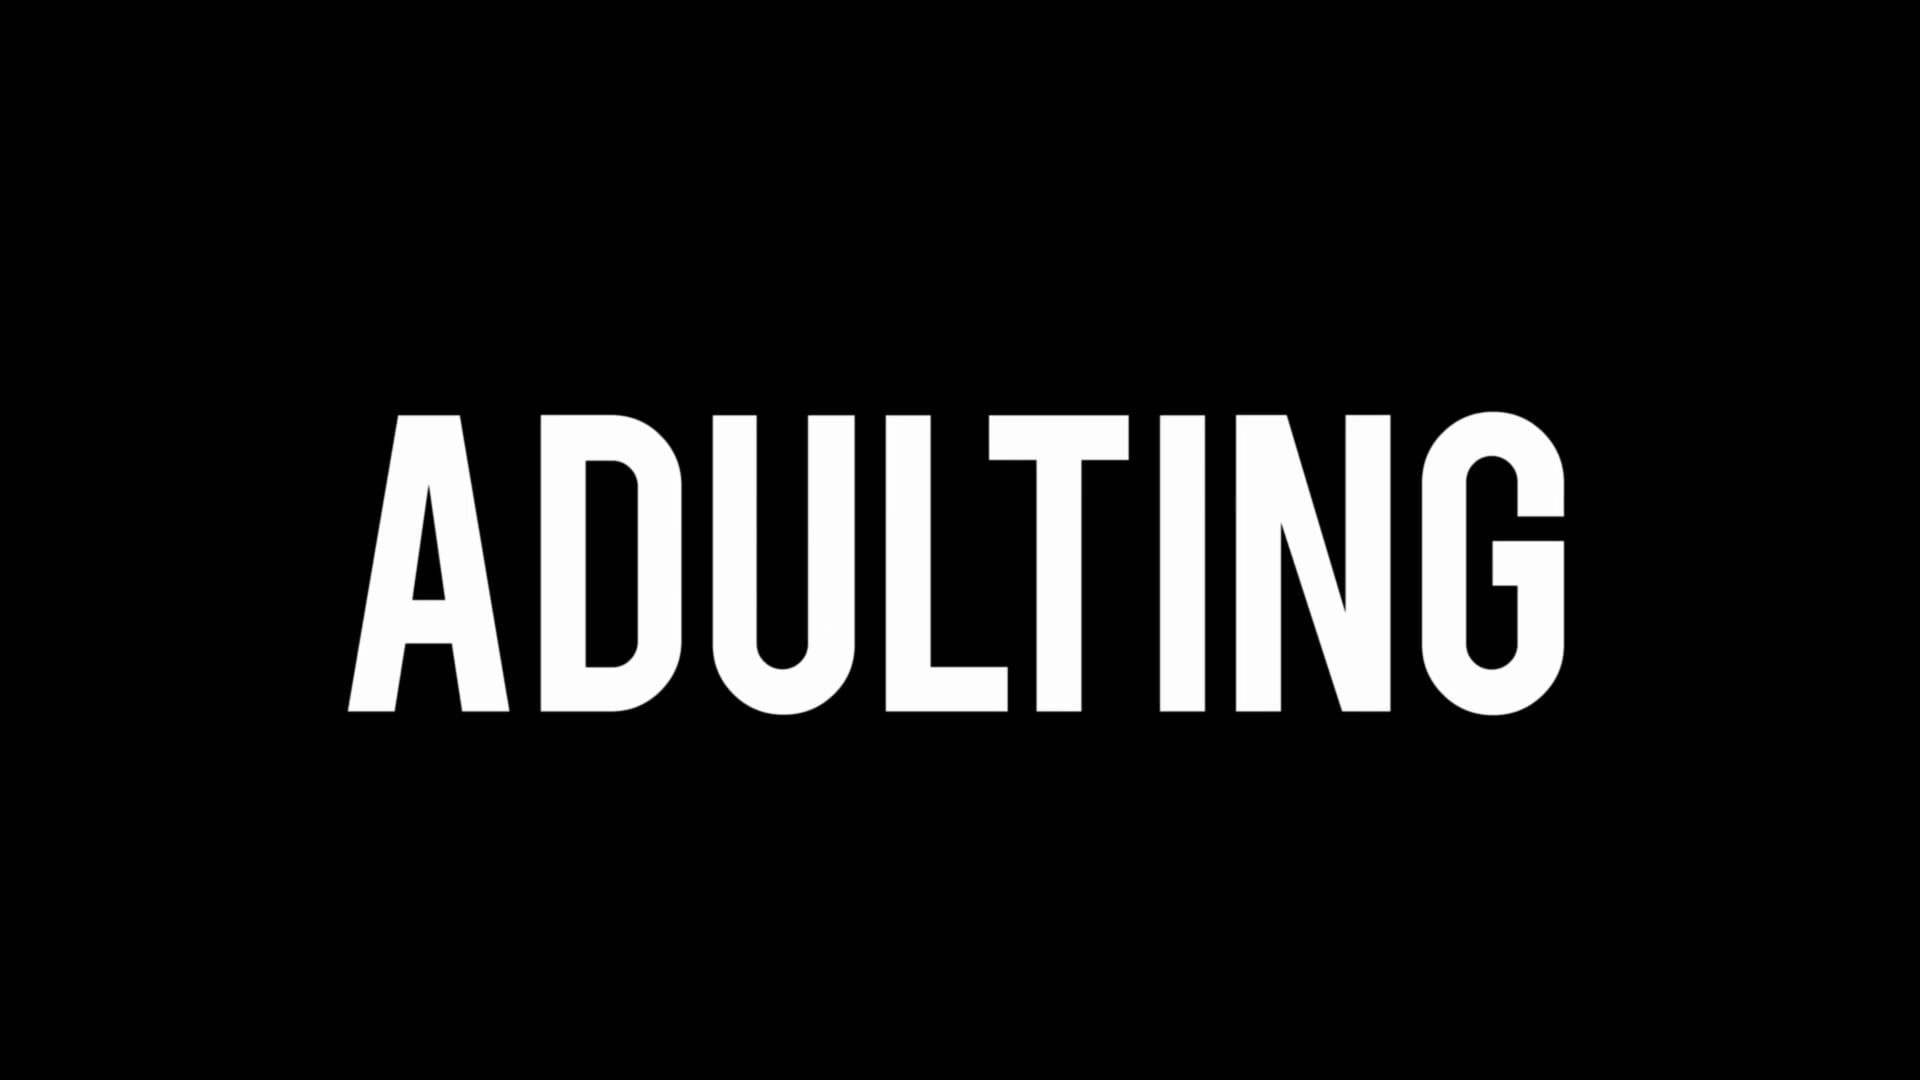 ADULTING | (2018) Trailer